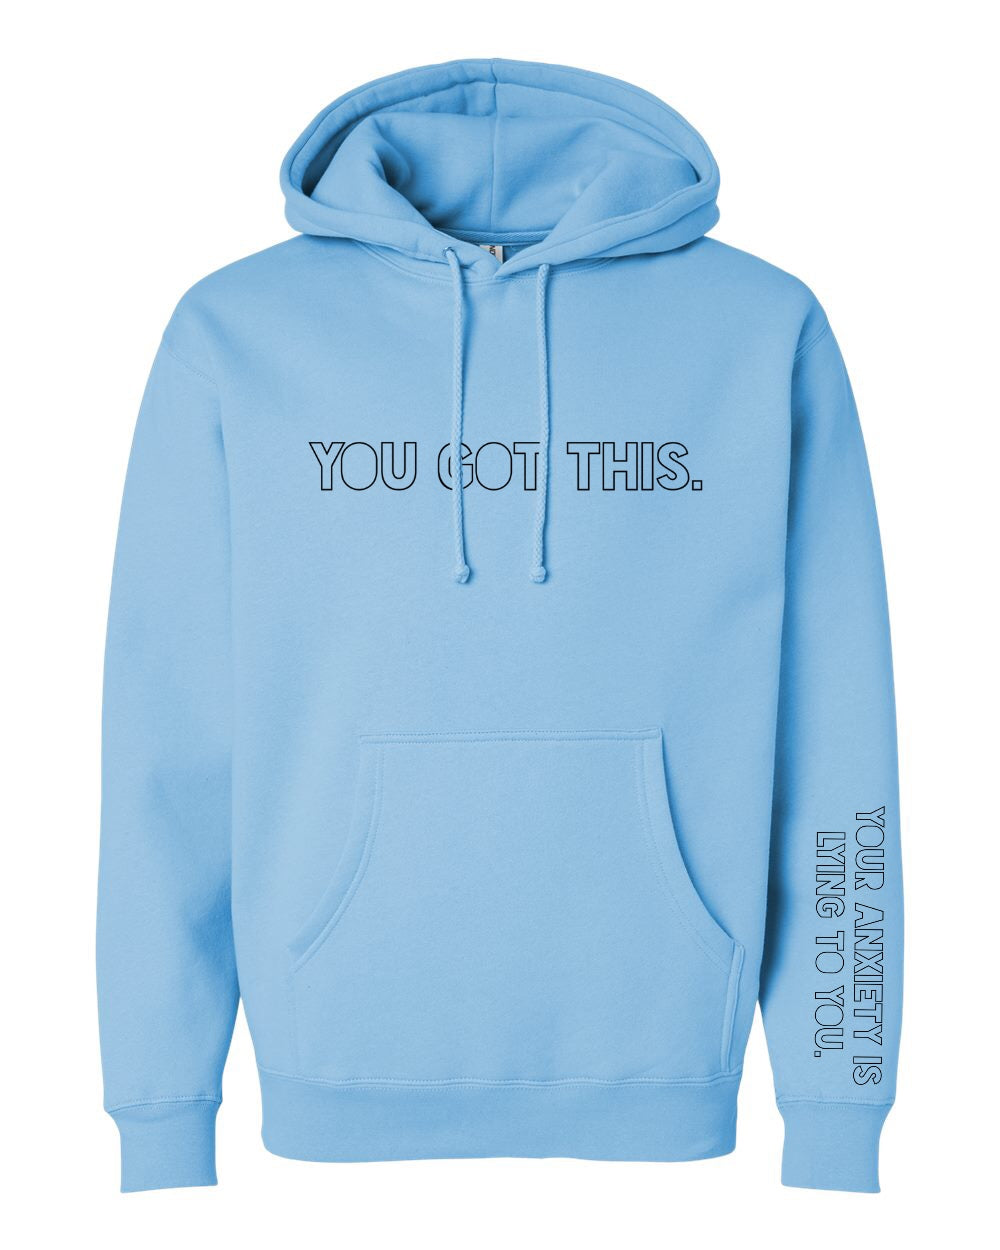 You Got This. Hoodie. [PREORDER]